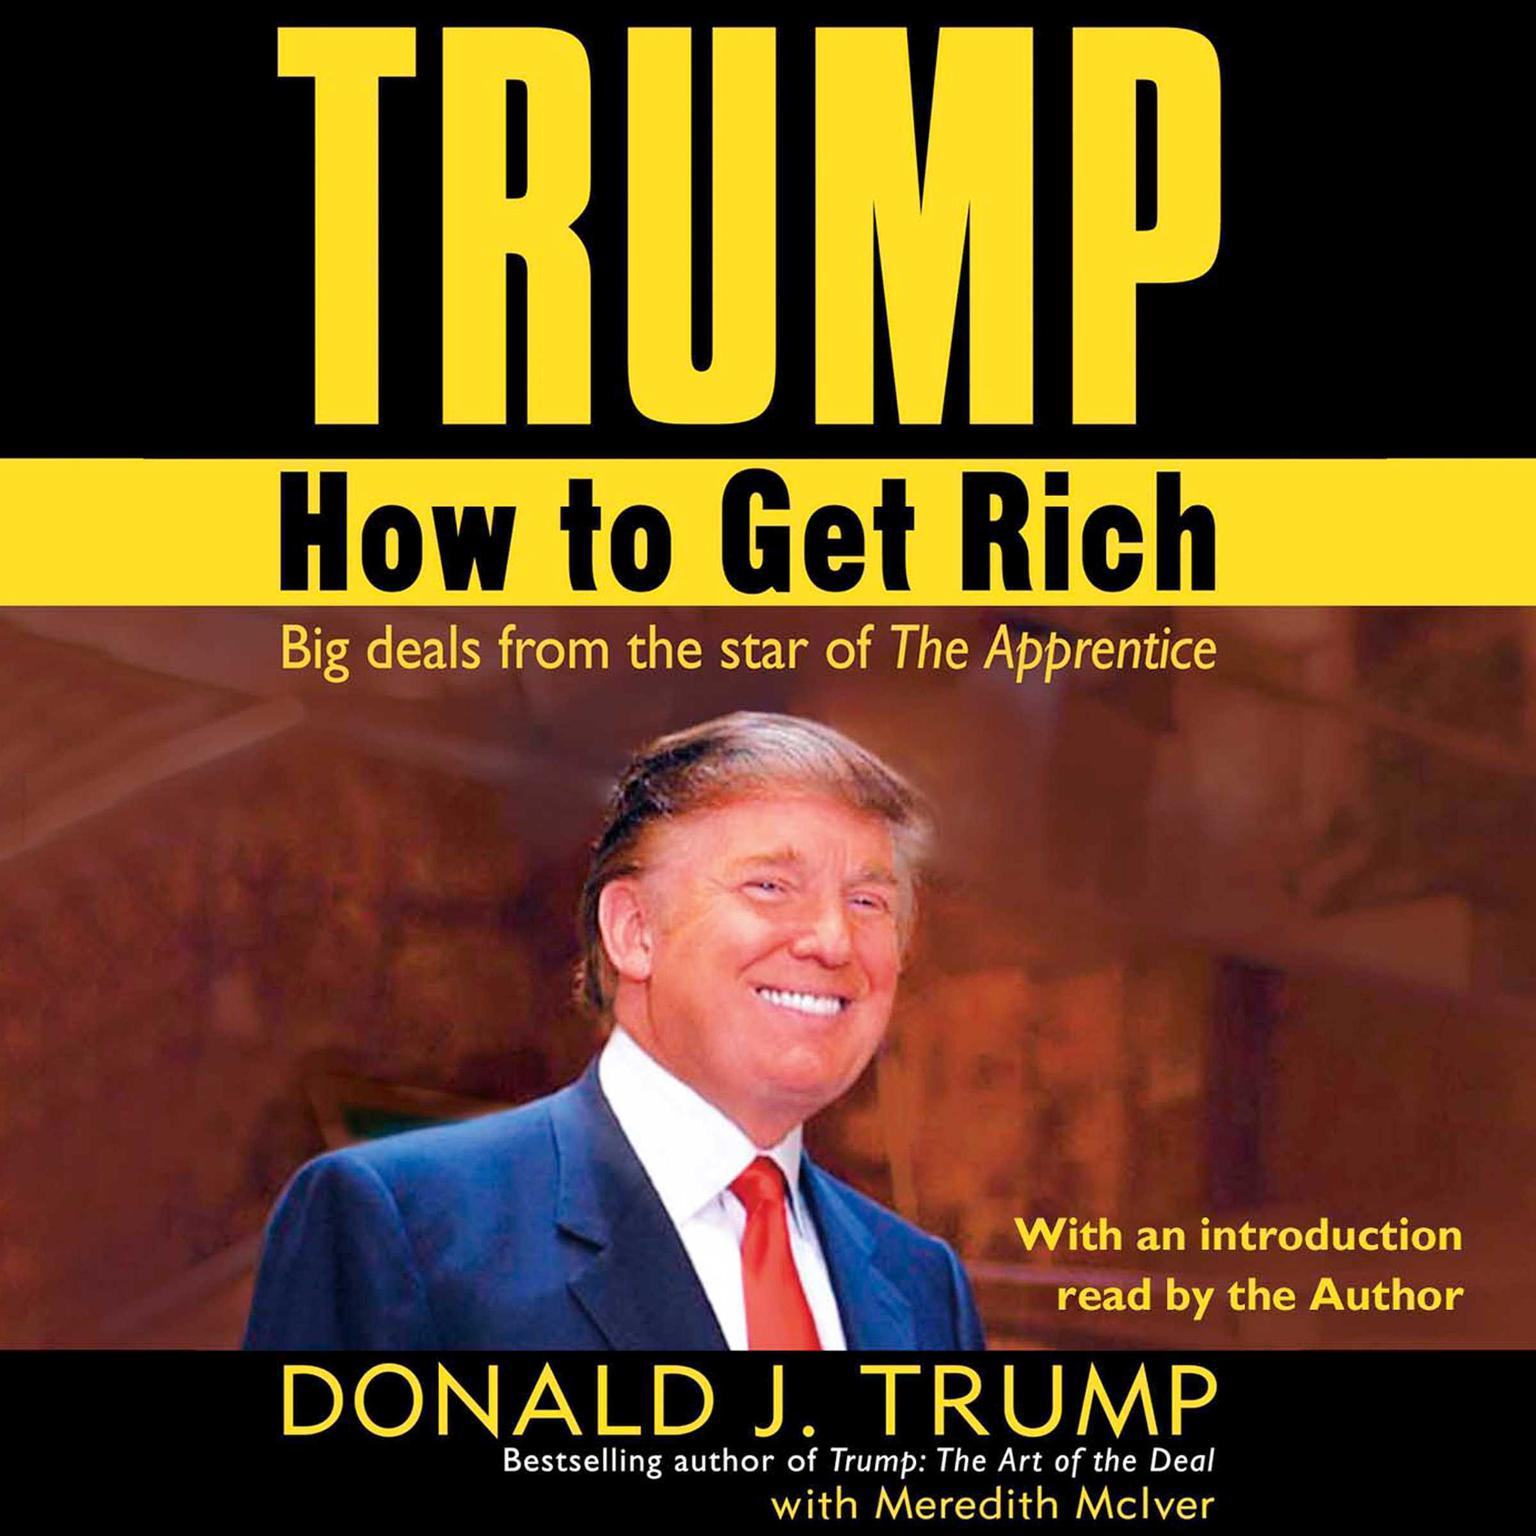 Trump: How to Get Rich Audiobook, by Donald J. Trump